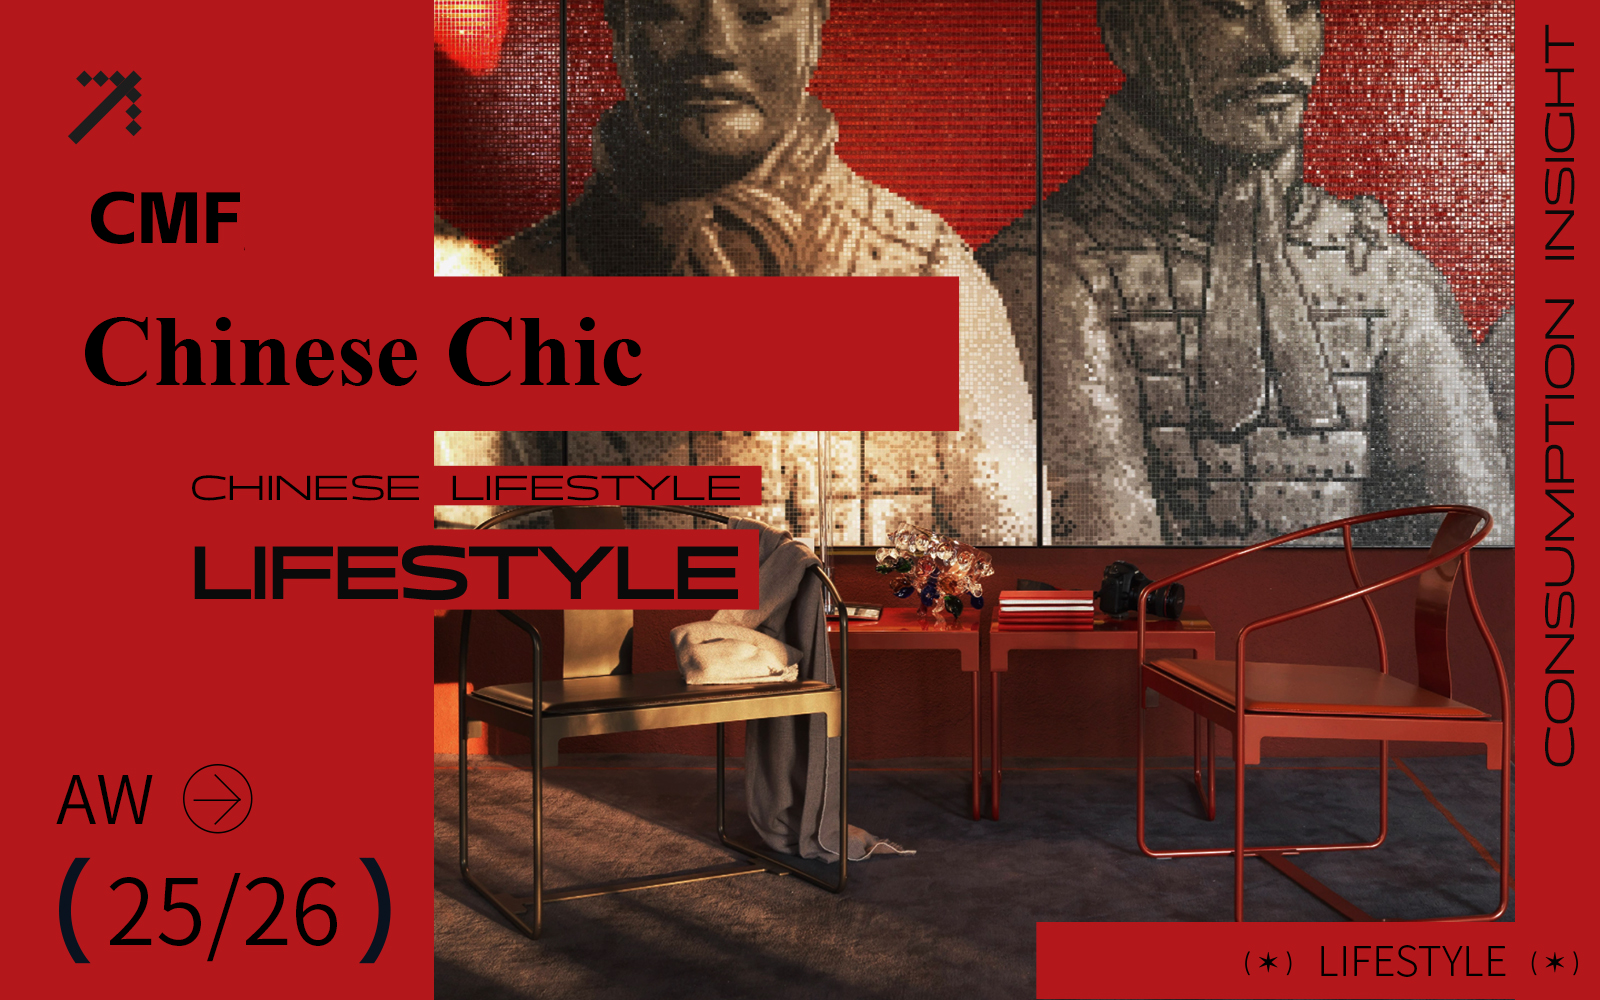 China-Chic Lifestyle -- A/W 25/26 Lifestyle Trend Predict